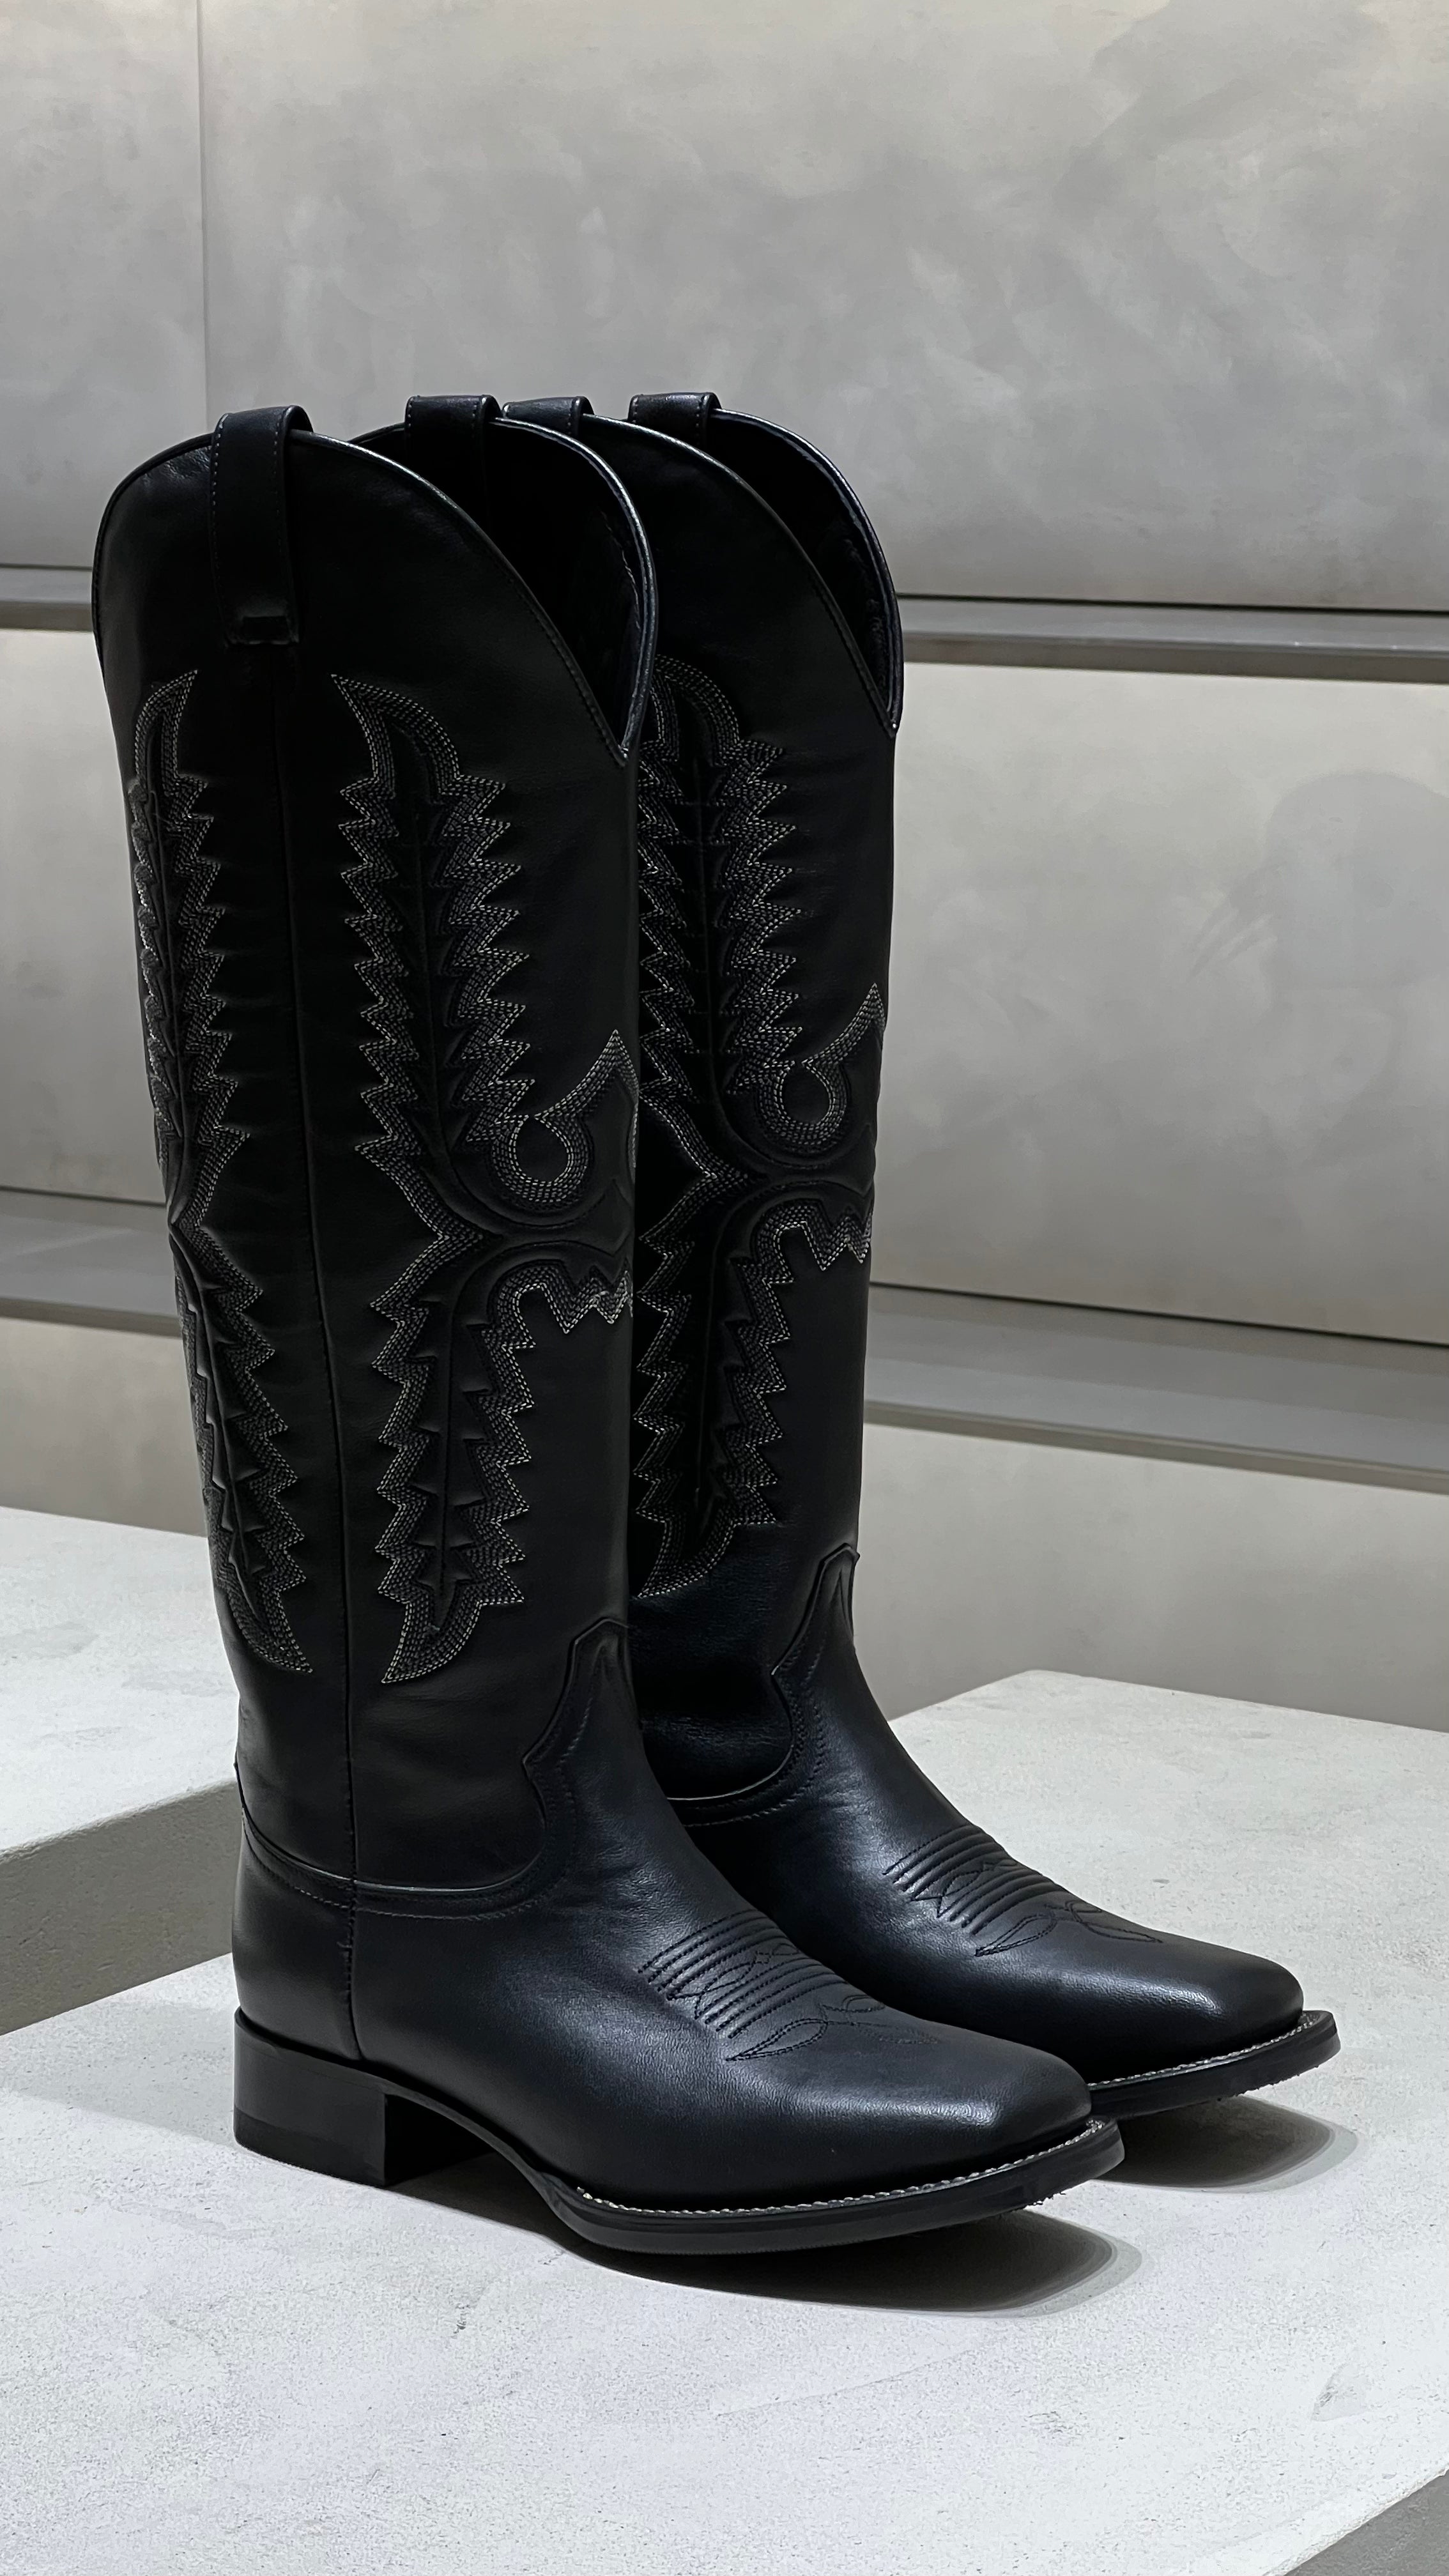 Dragon boots, black leather